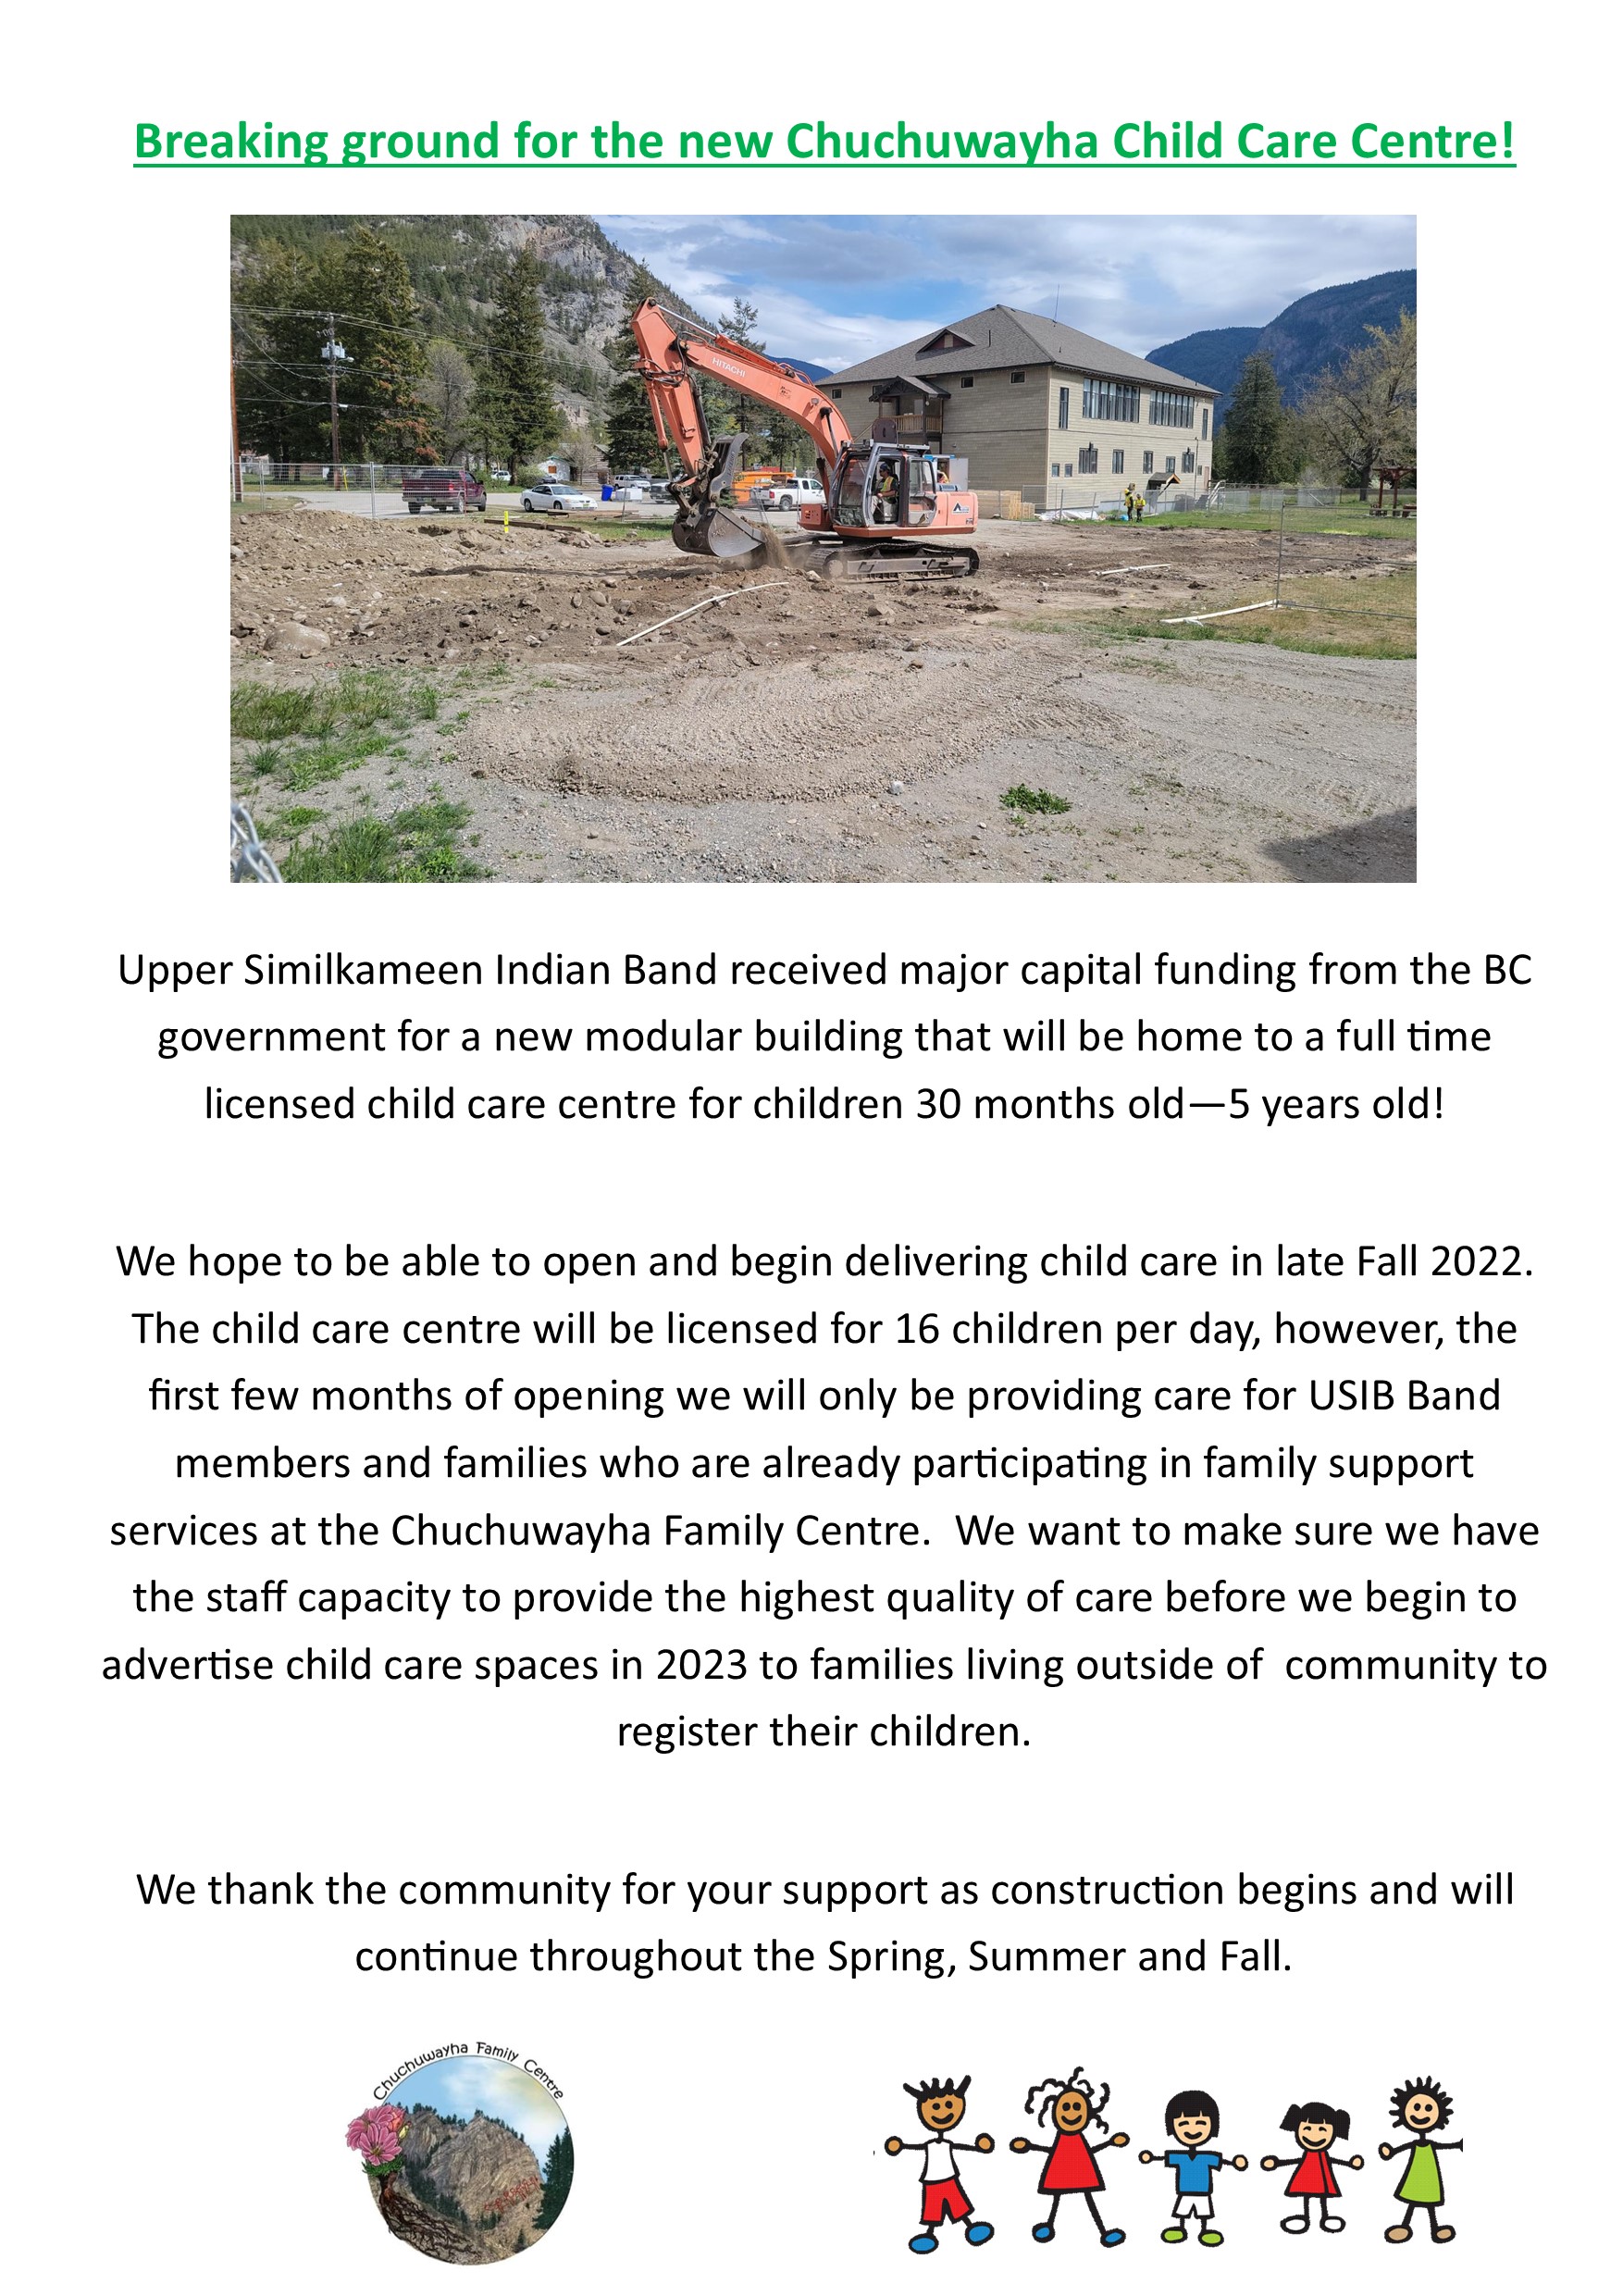 Daycare construction notice for community